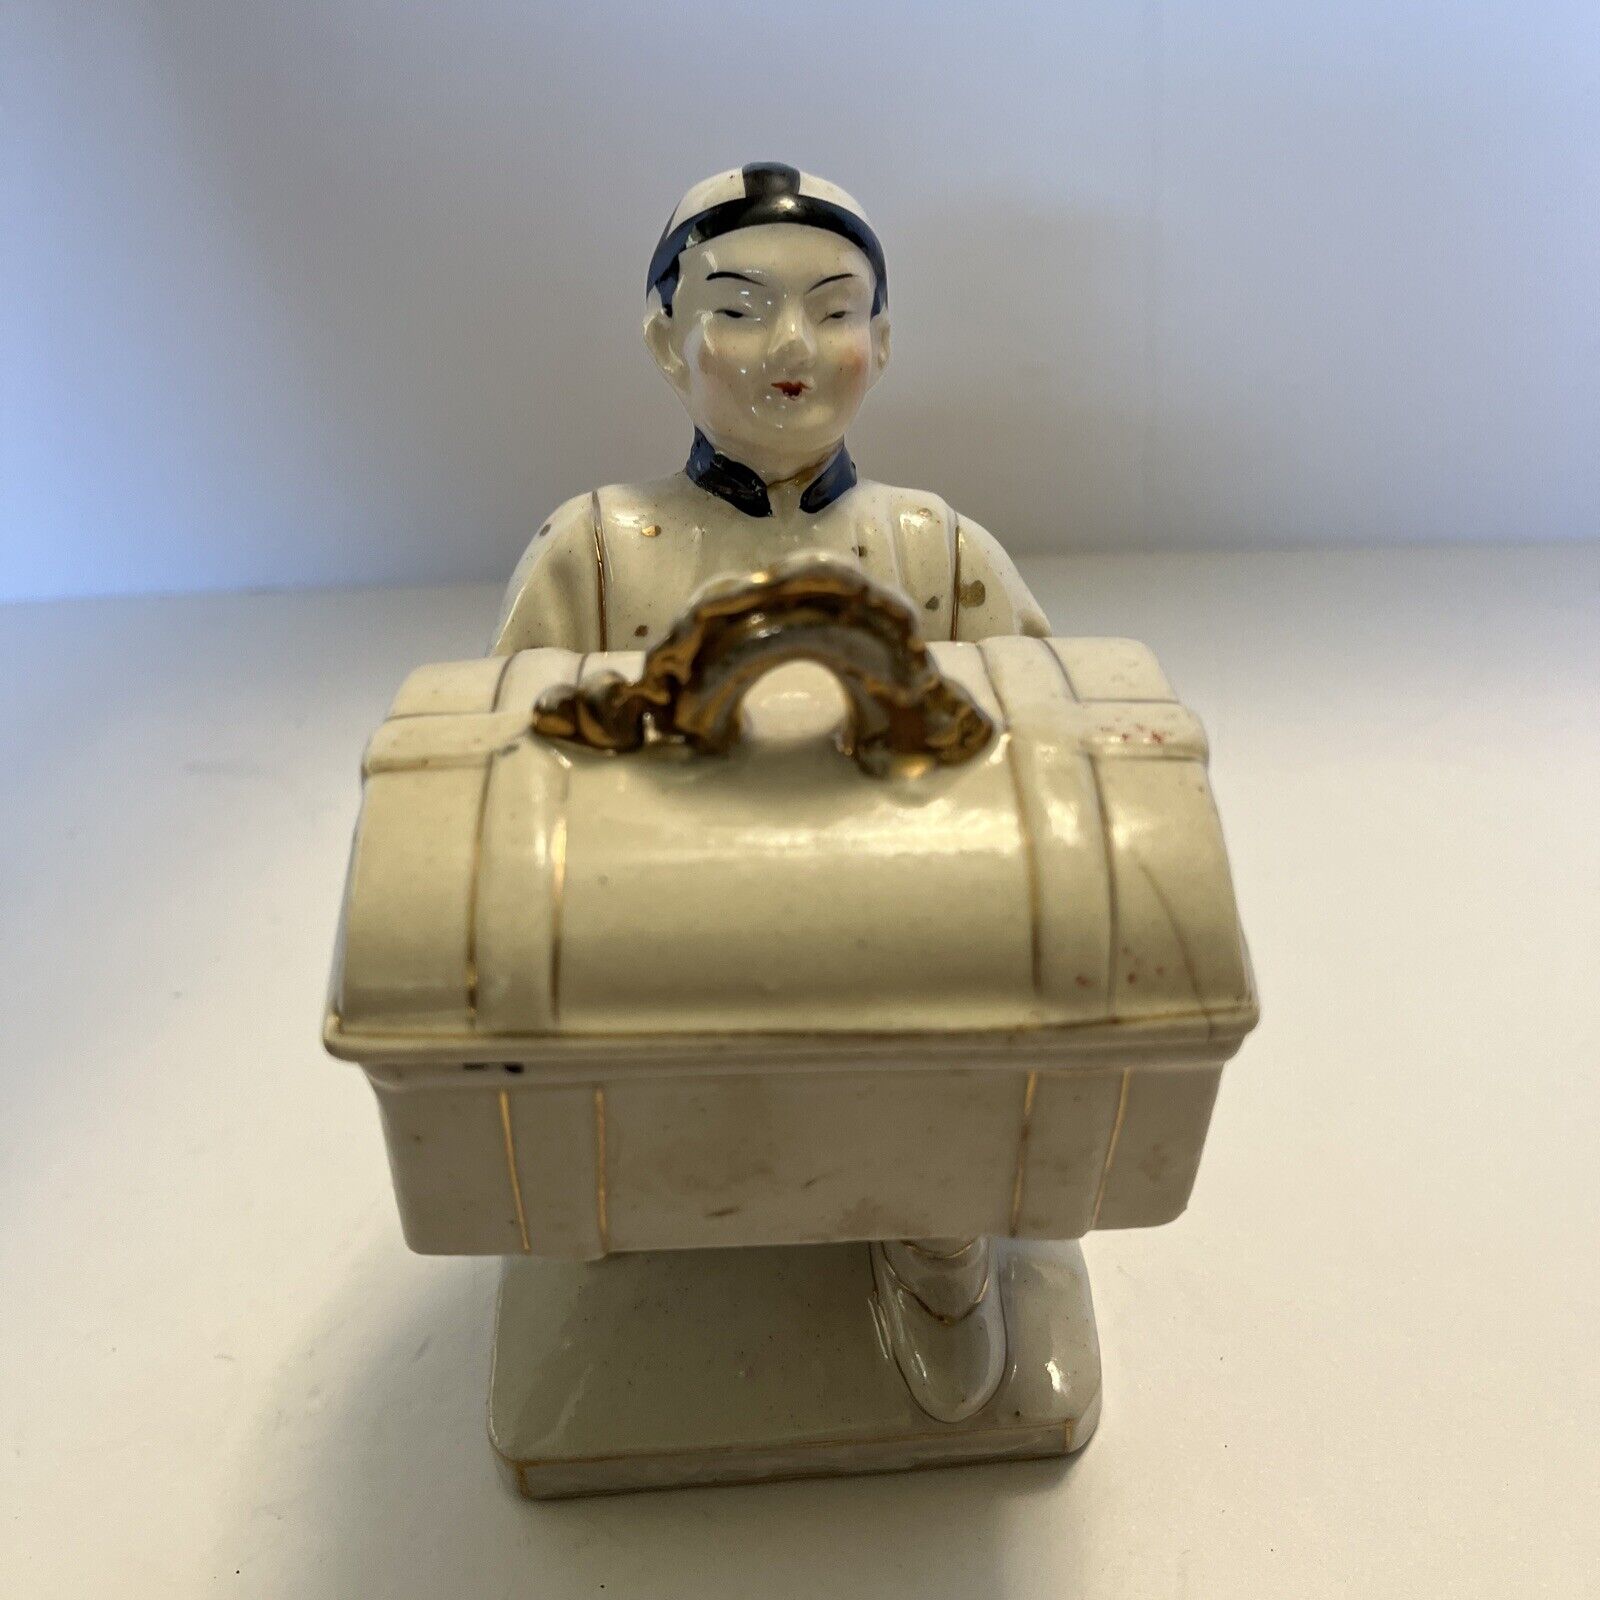 Vintage Japan Earthenware figure man with chest Asian art costume. Occupied?